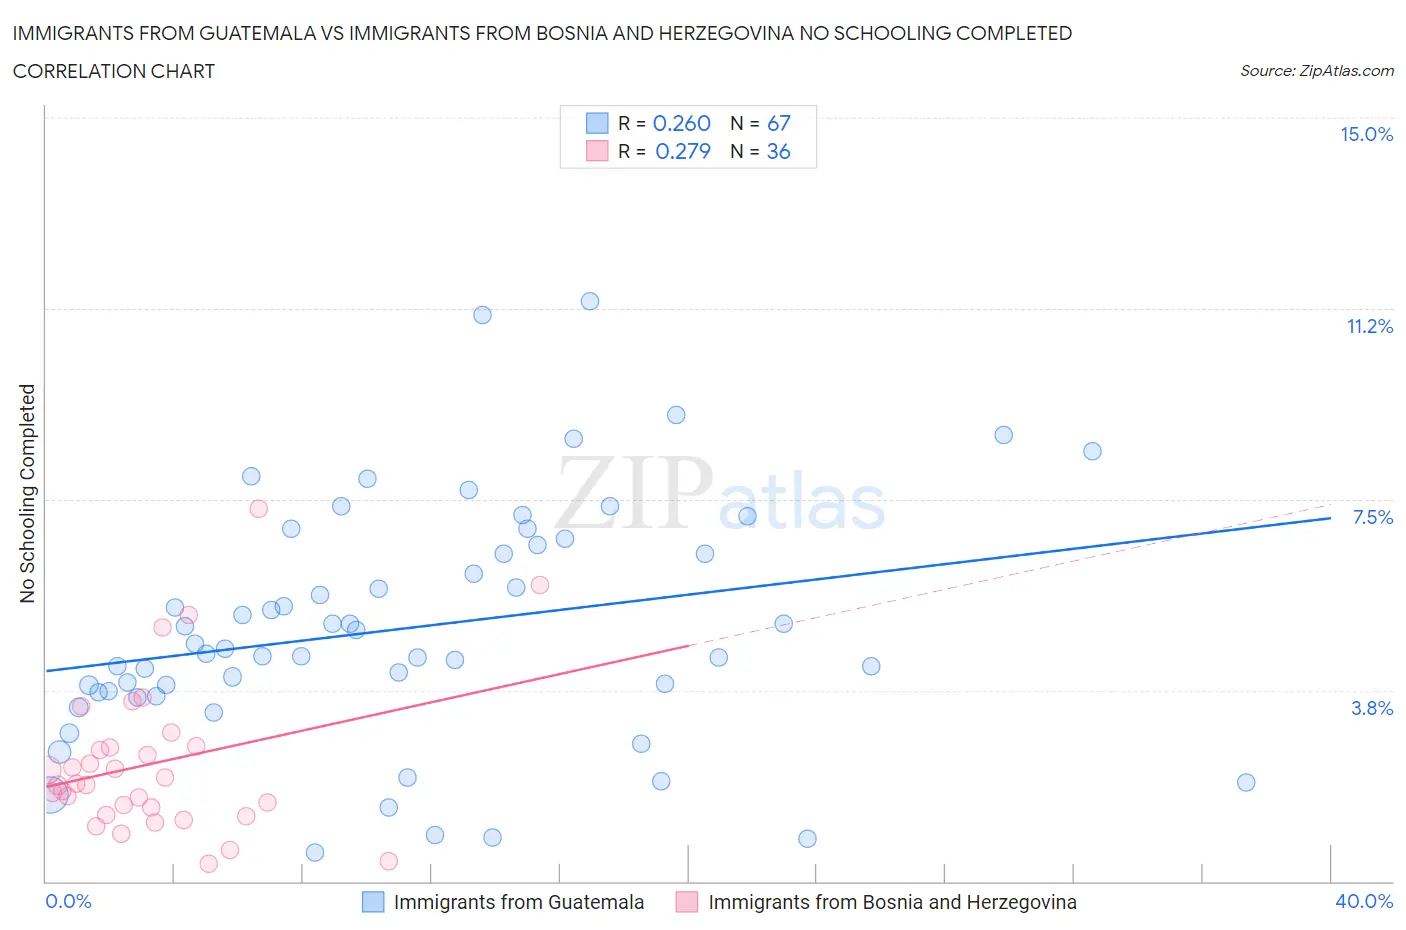 Immigrants from Guatemala vs Immigrants from Bosnia and Herzegovina No Schooling Completed